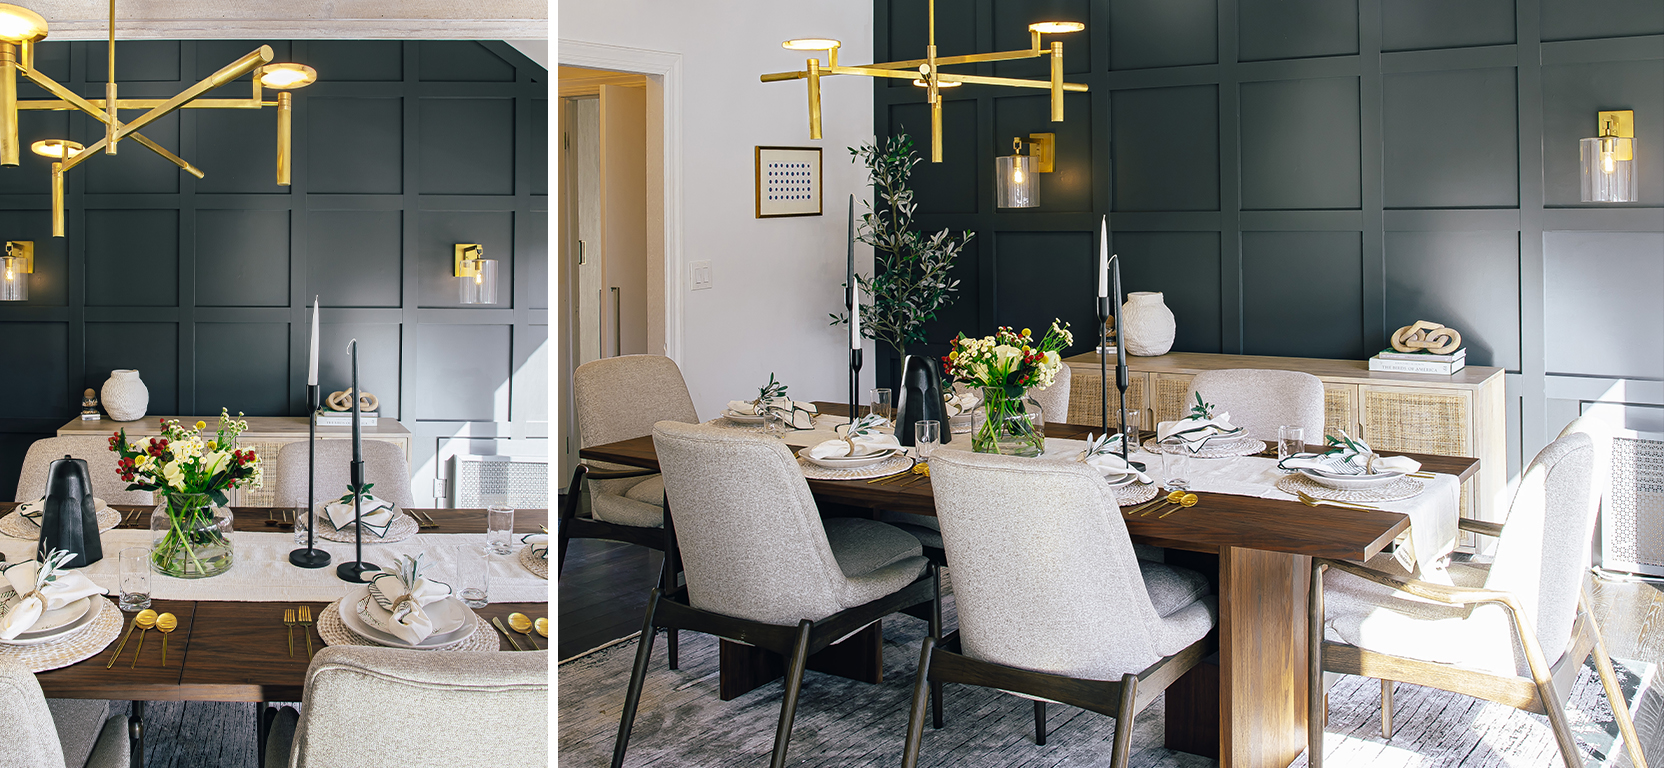 Wood dining table with service for six, modern gold chandelier with light wood sideboard against a dark board and batten statement wall.